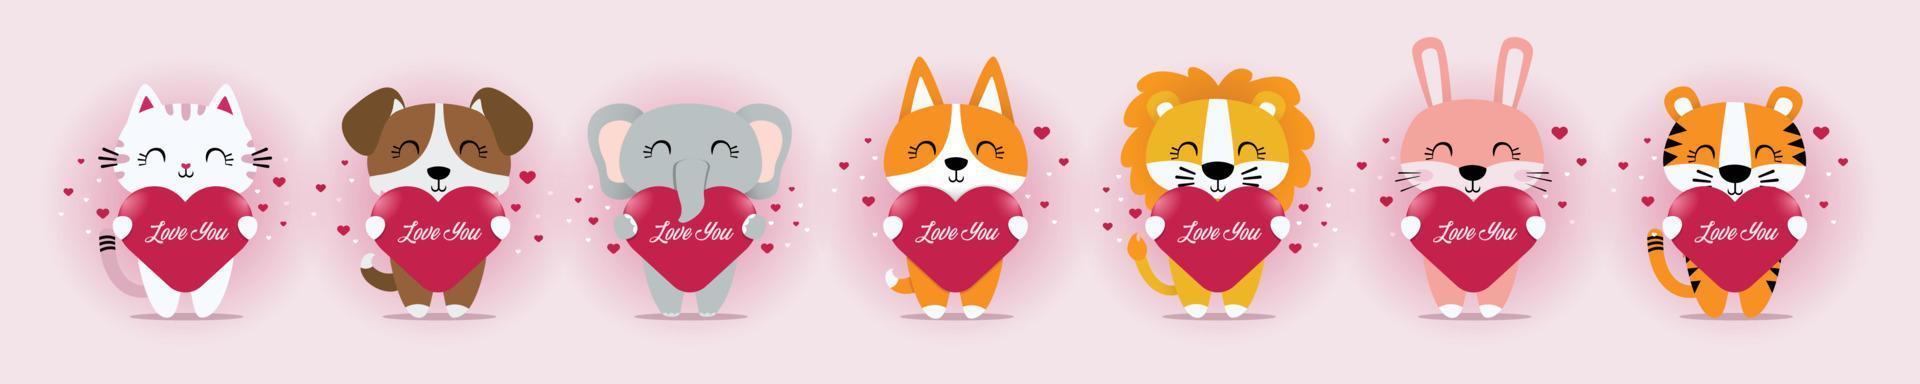 A Collection of Cute Animal Pictures with the Theme of Animal Love with Animal Movements Hugging a Heart Symbol That Says I Love You on Valentine's Day for Animals. vector